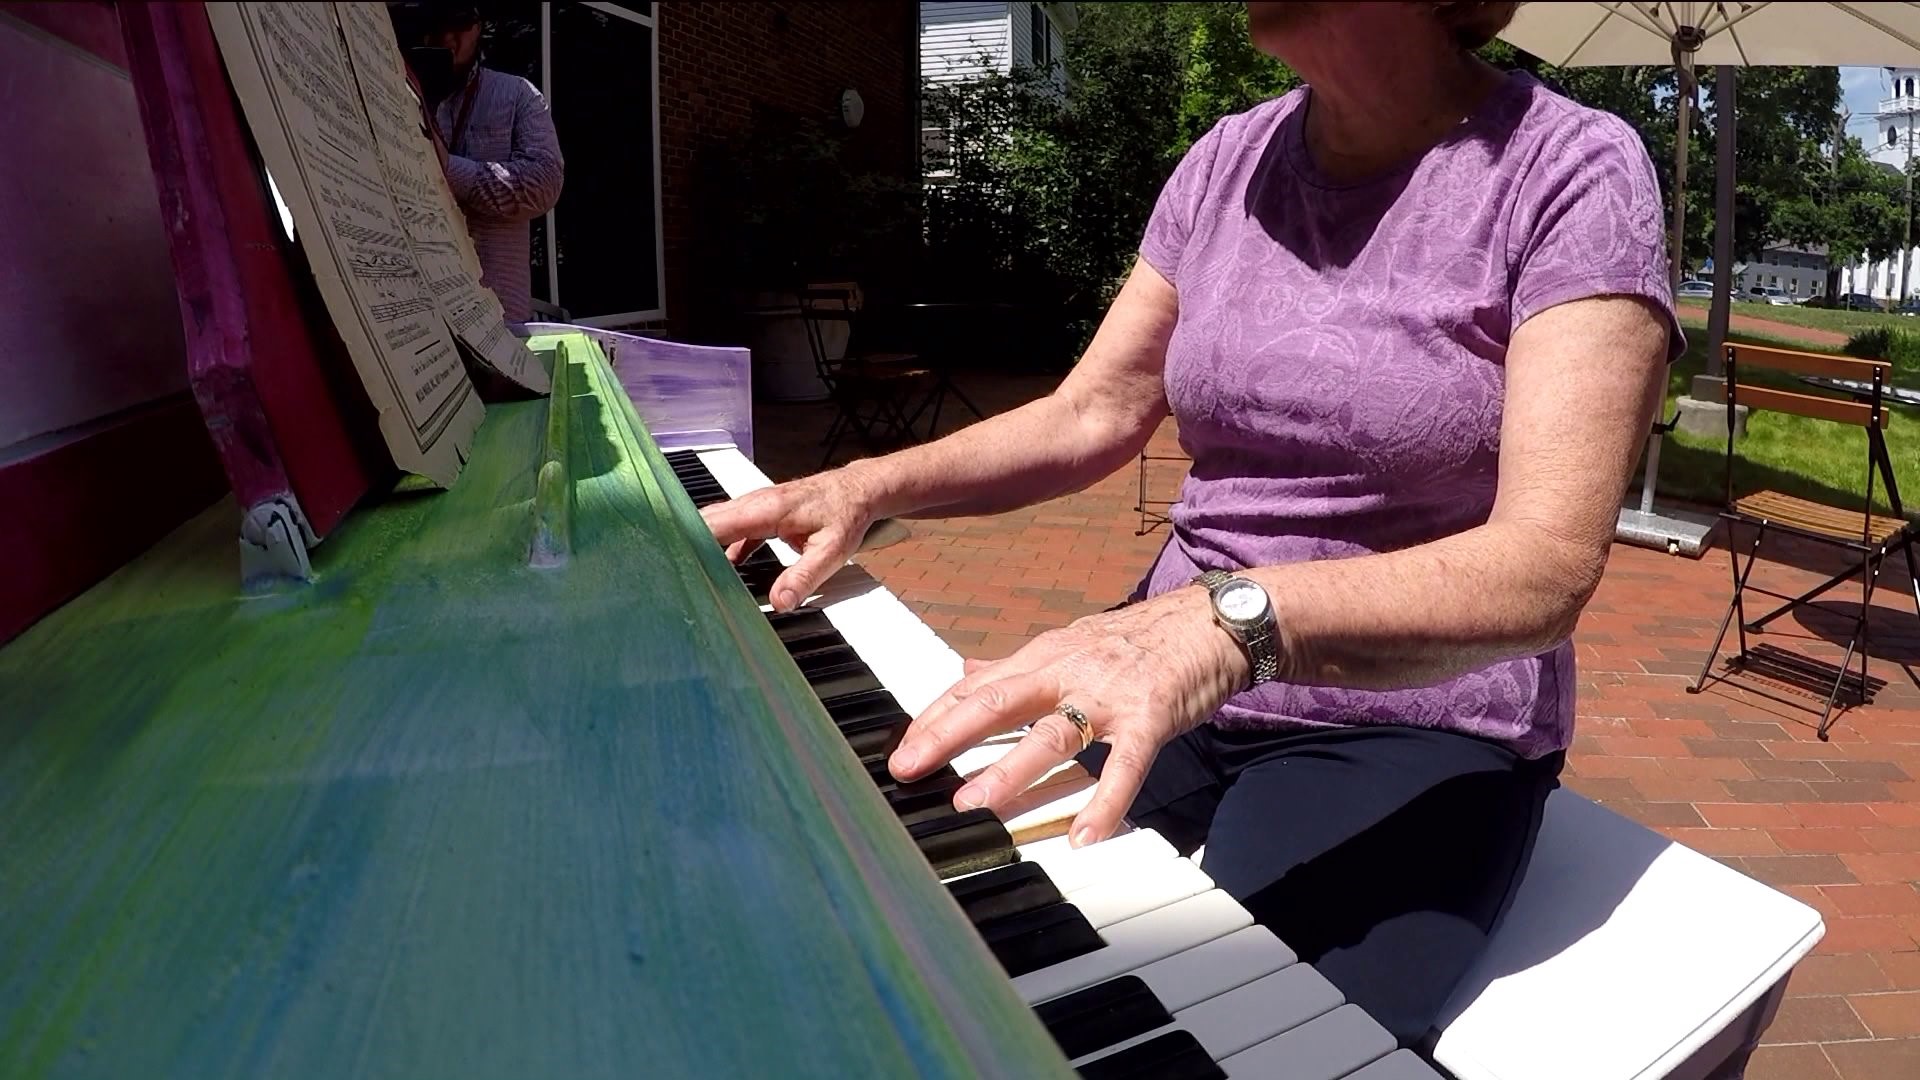 Project places pianos for the public to share on the shoreline